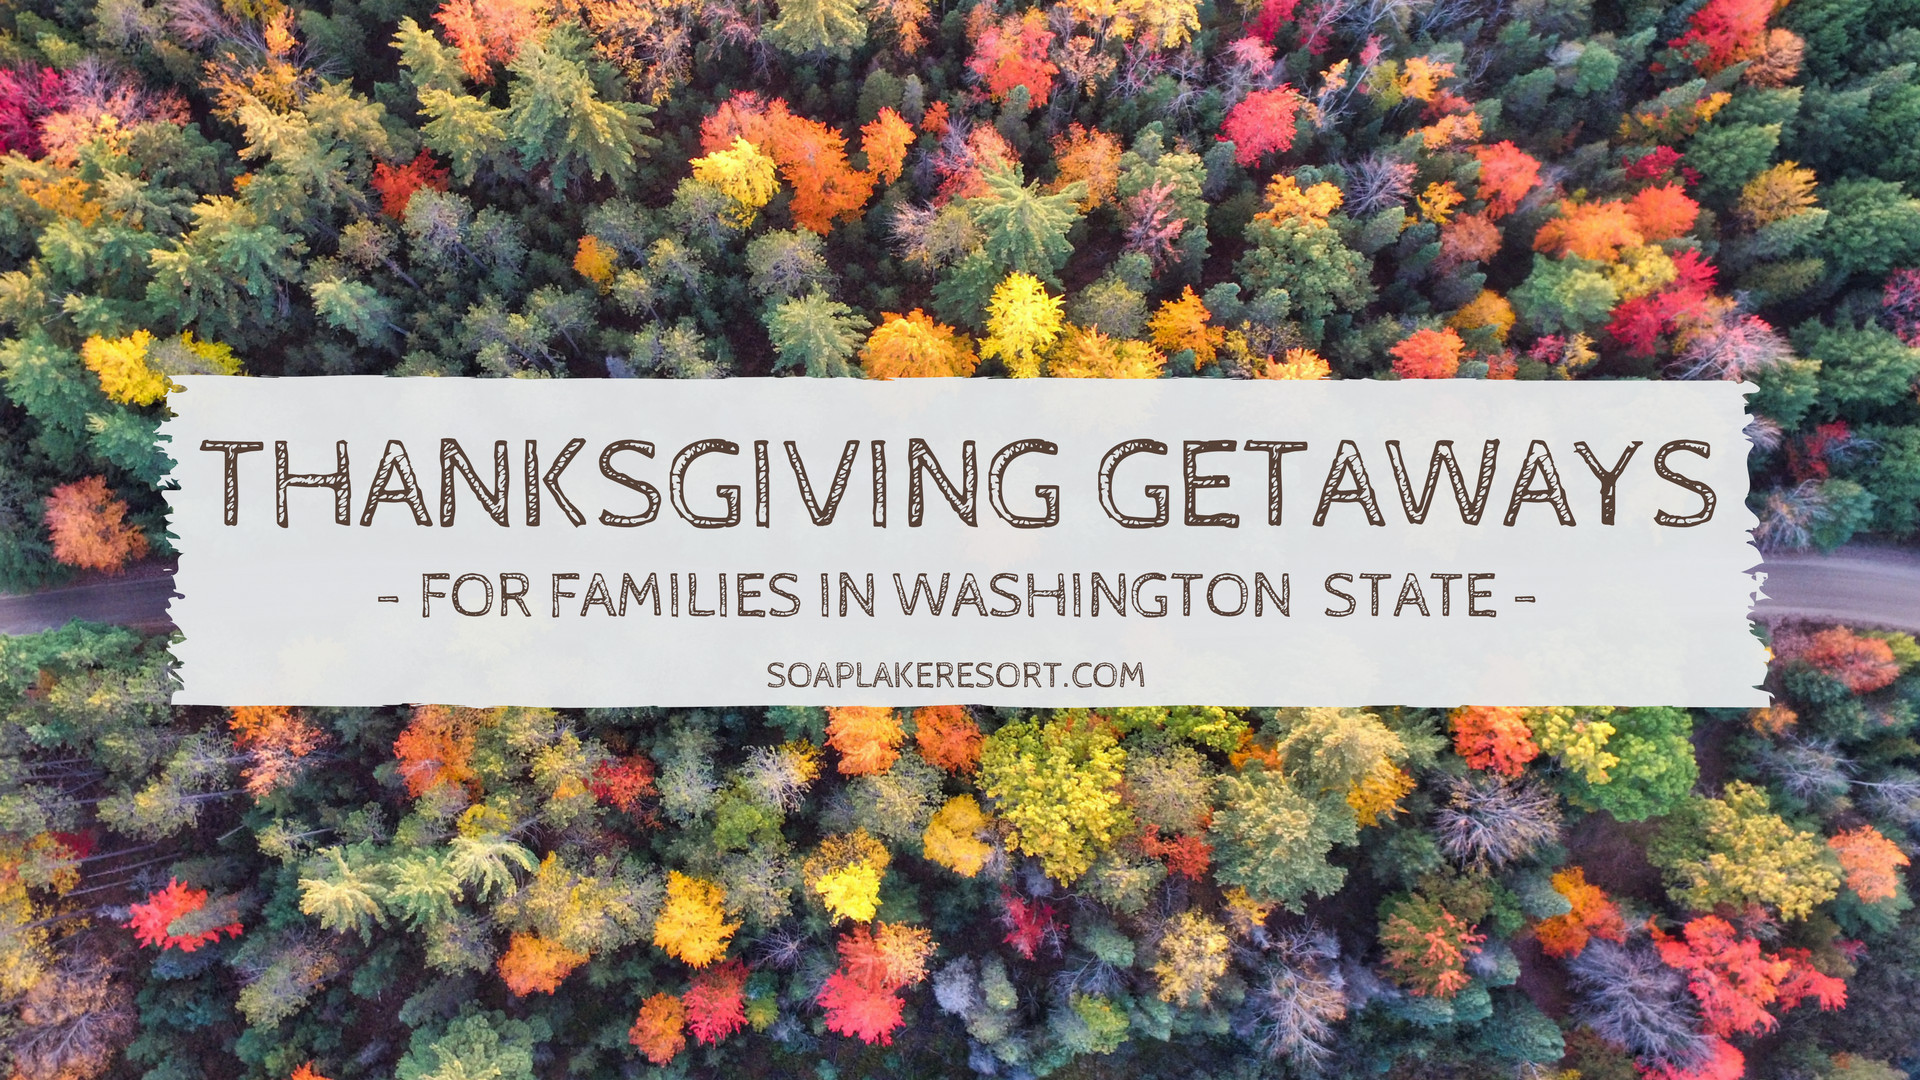 Thanksgiving Vacation Ideas For Families
 Thanksgiving aways for families in Washington state